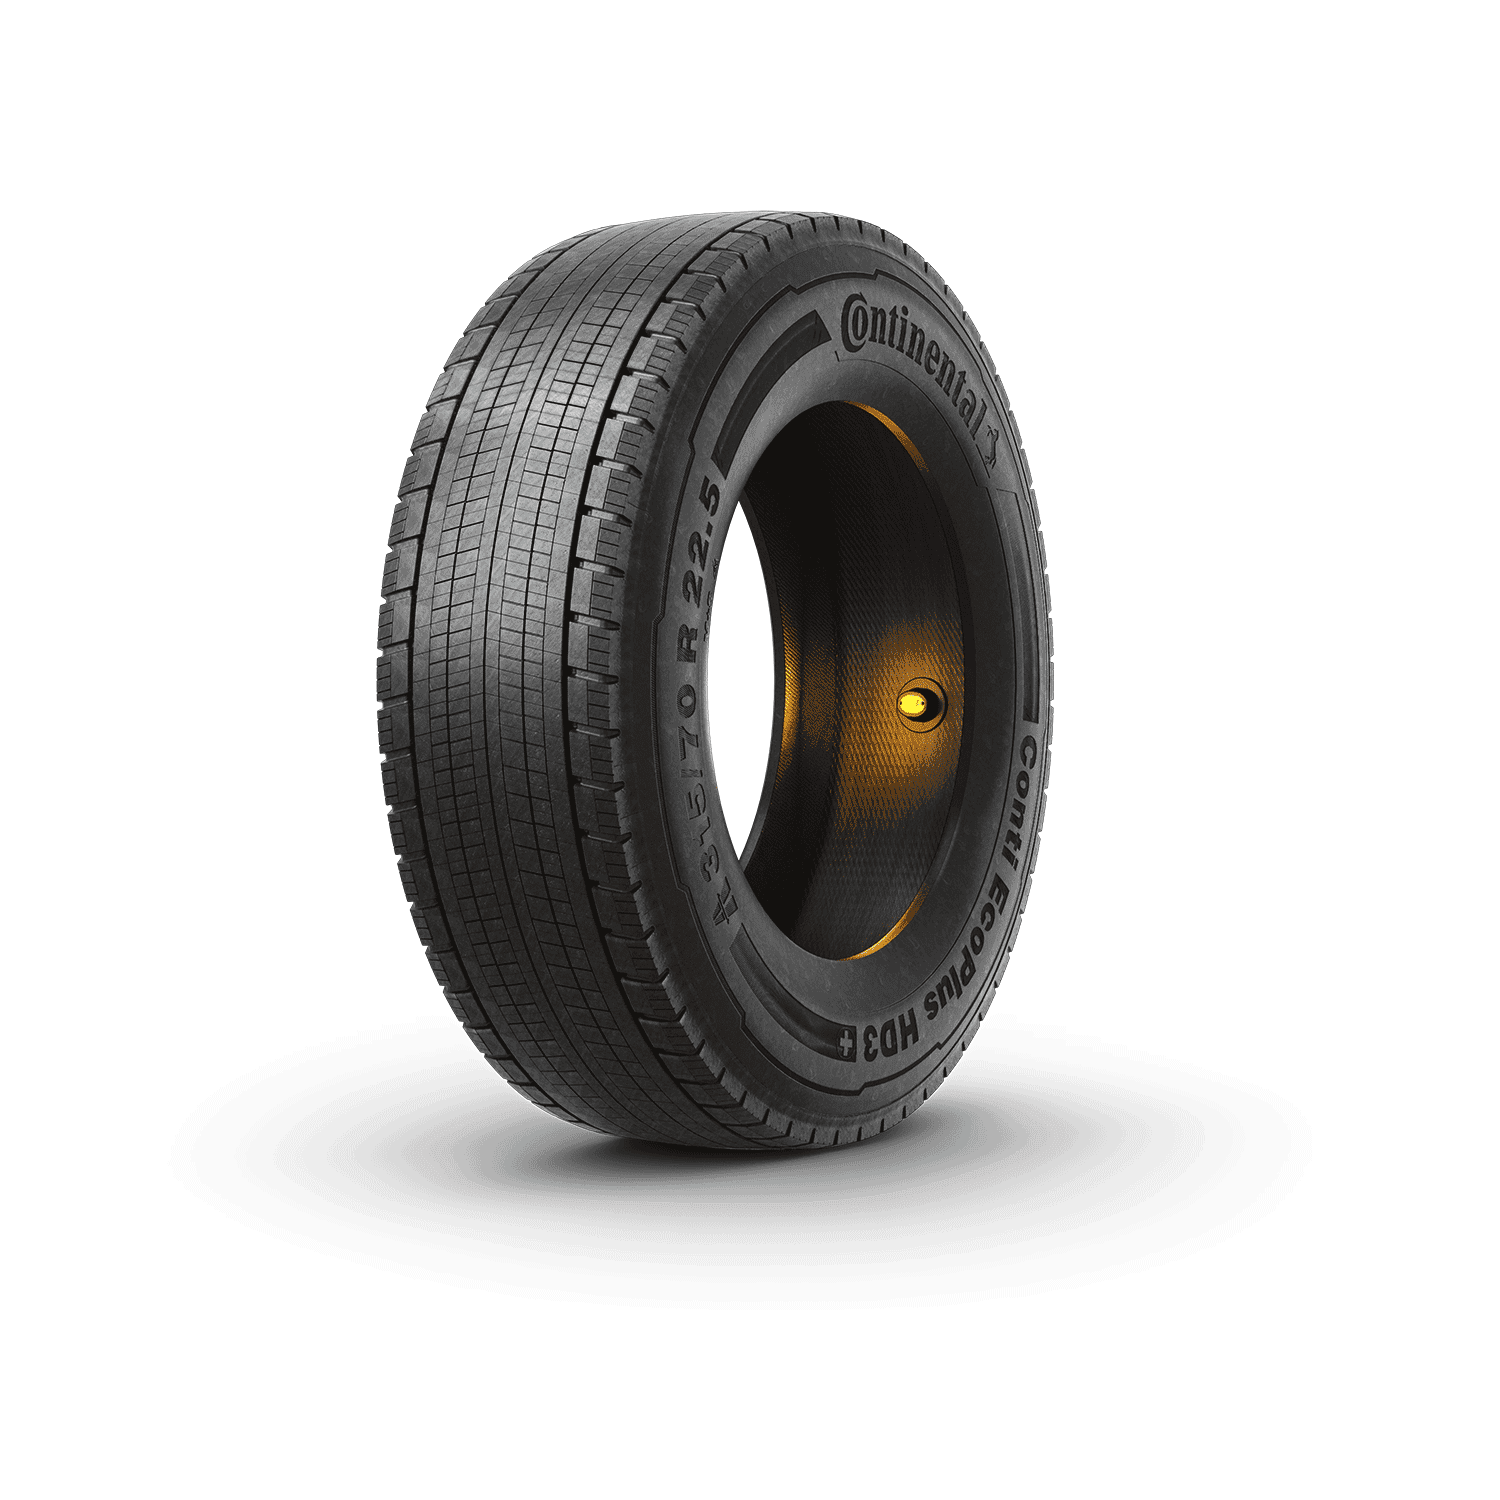 Tire with mounted Sensor